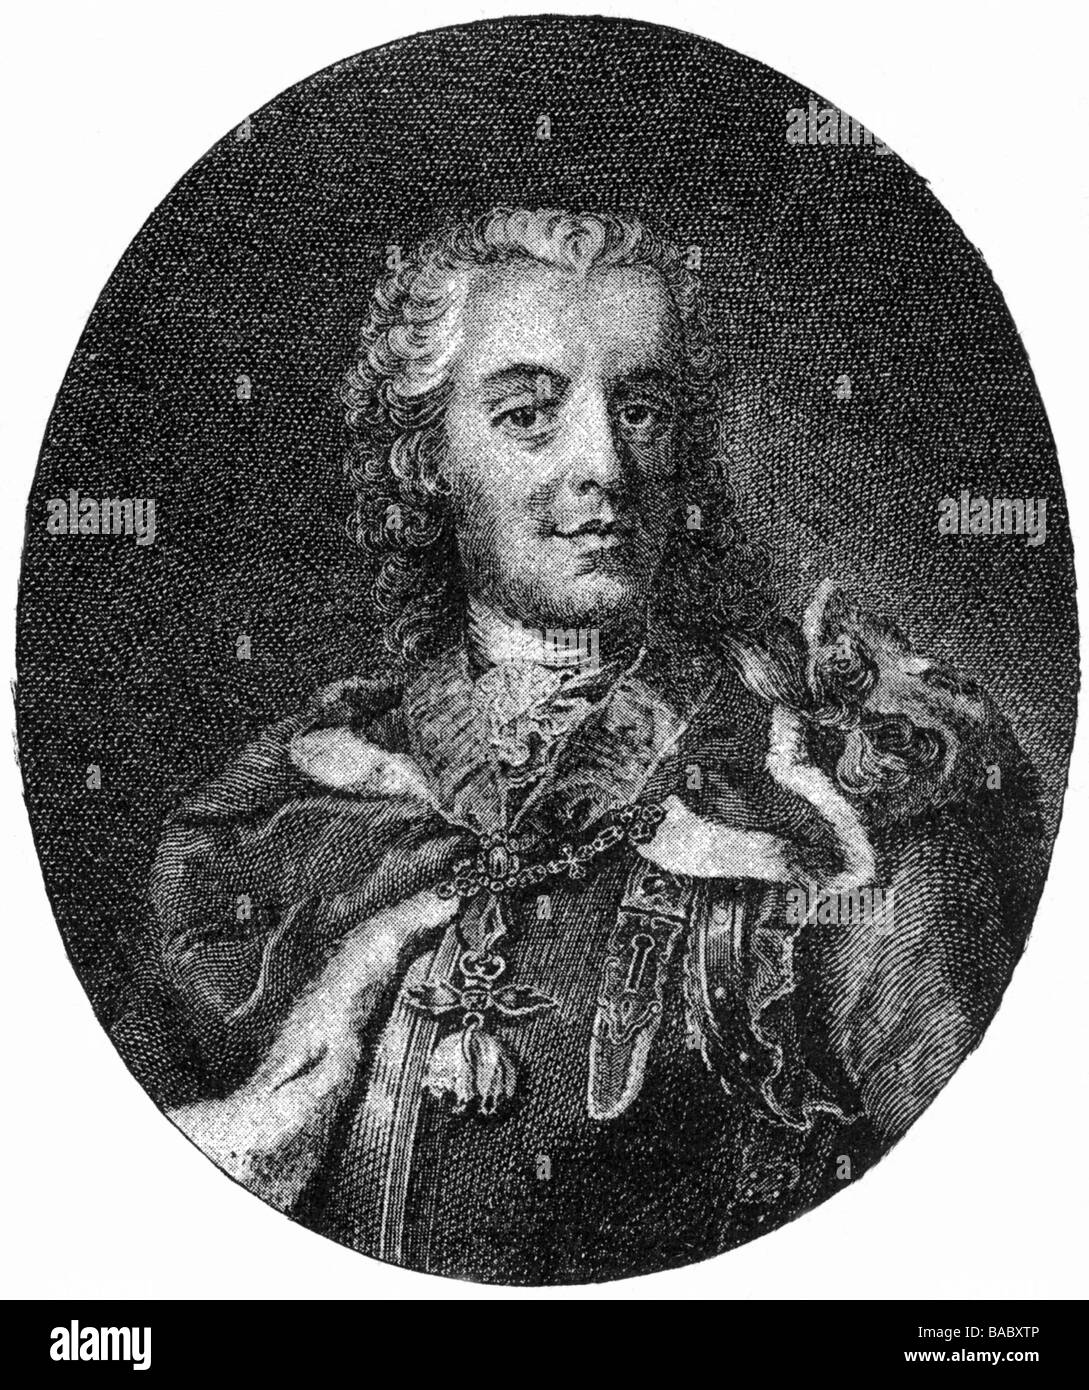 Karl Alexander, 12.12.1712 - 4.7.1780, Prince of Lorraine and Bar, Imperial general, portrait, copper engraving, 18th century, , Artist's Copyright has not to be cleared Stock Photo